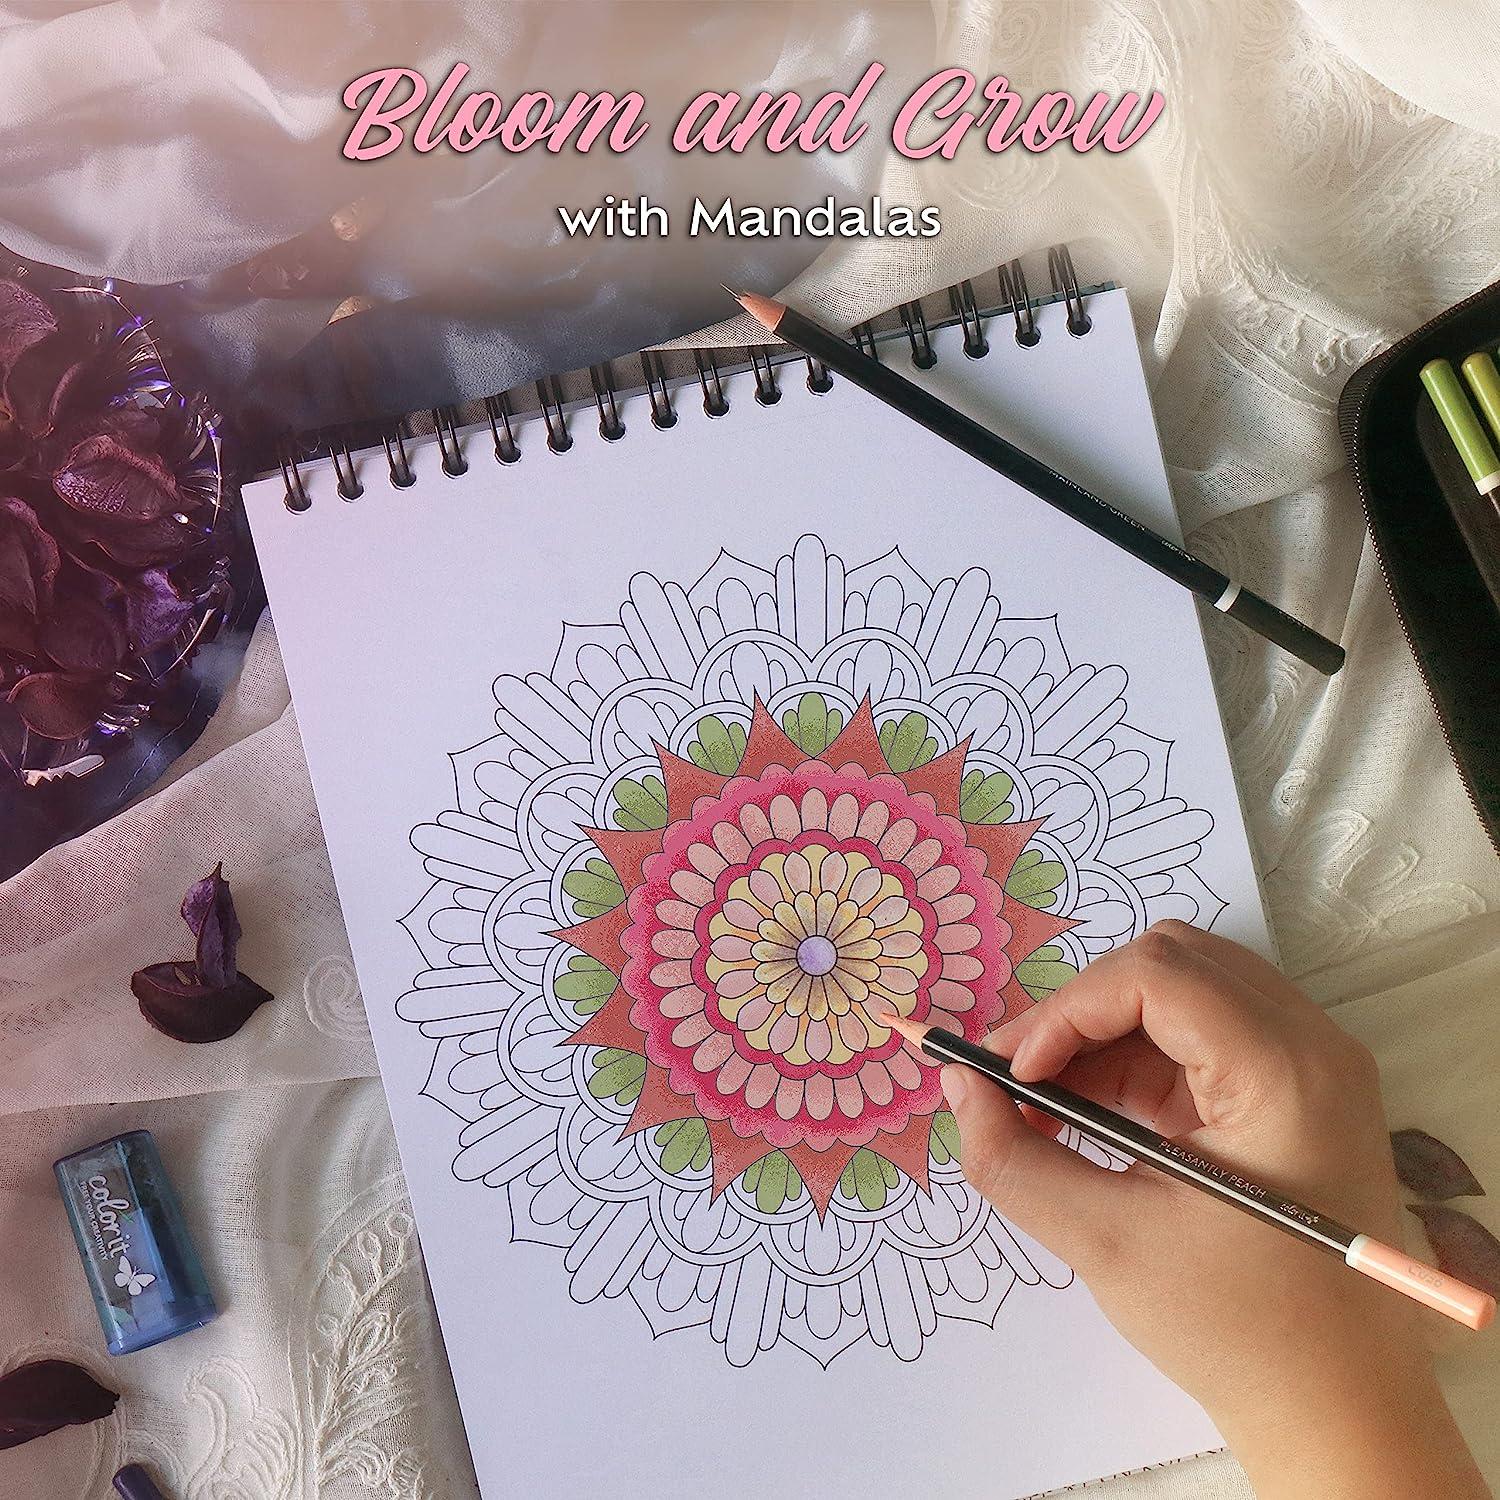 ColorIt Mandalas To Color, Volume III Coloring Book for Adults